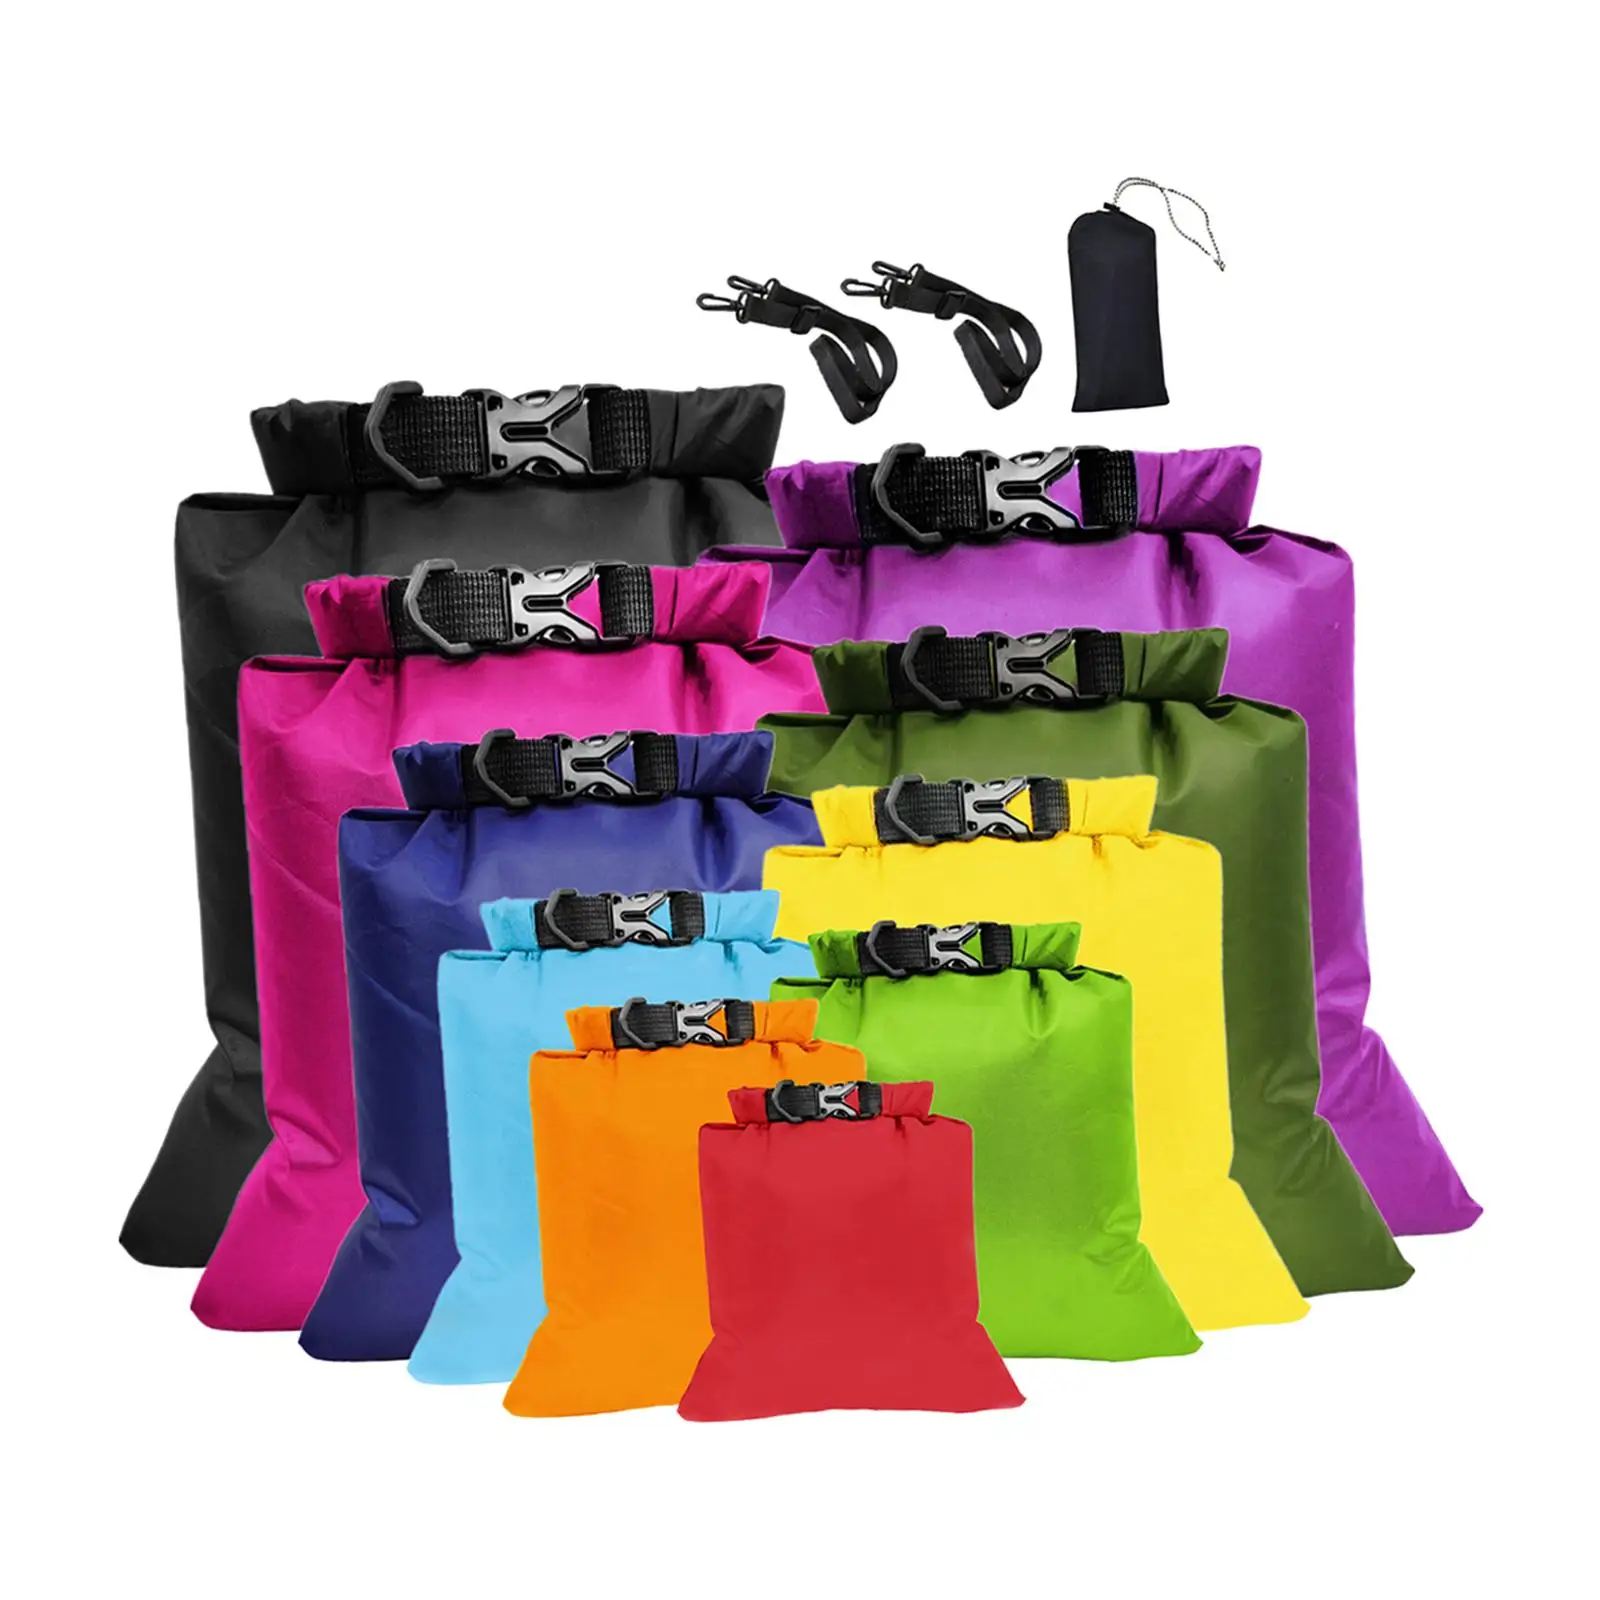 10x Floating Waterproof Bags Lightweight Heavy Duty Roll Top Floating Bag for Kayaking for Surfing Swimming Kayak Hiking Boating